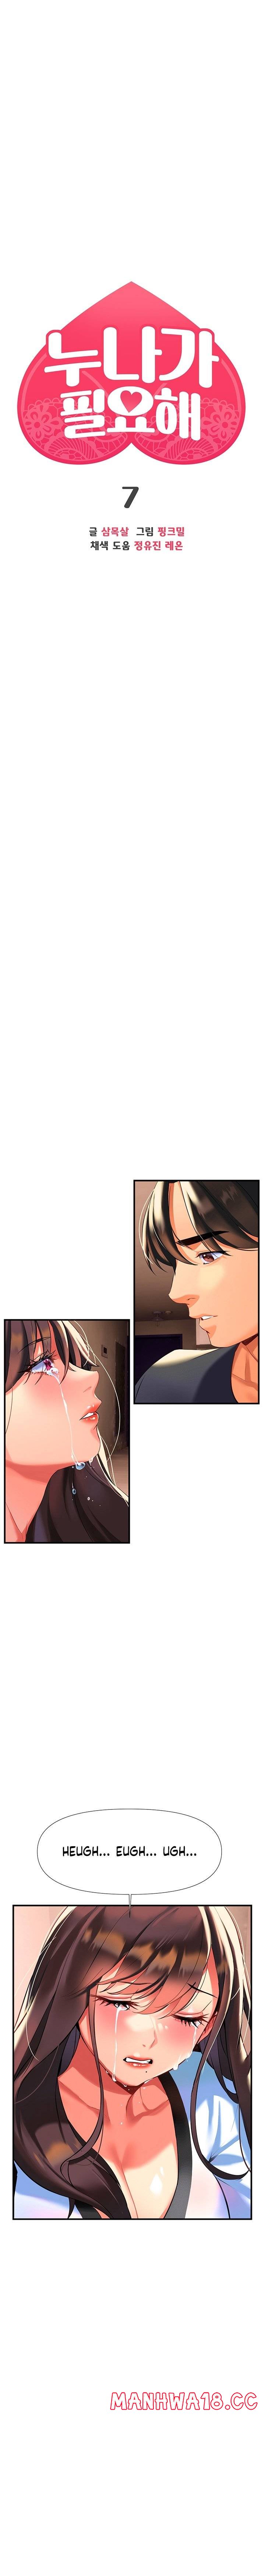 I Need You, Noona Raw - Chapter 7 Page 3